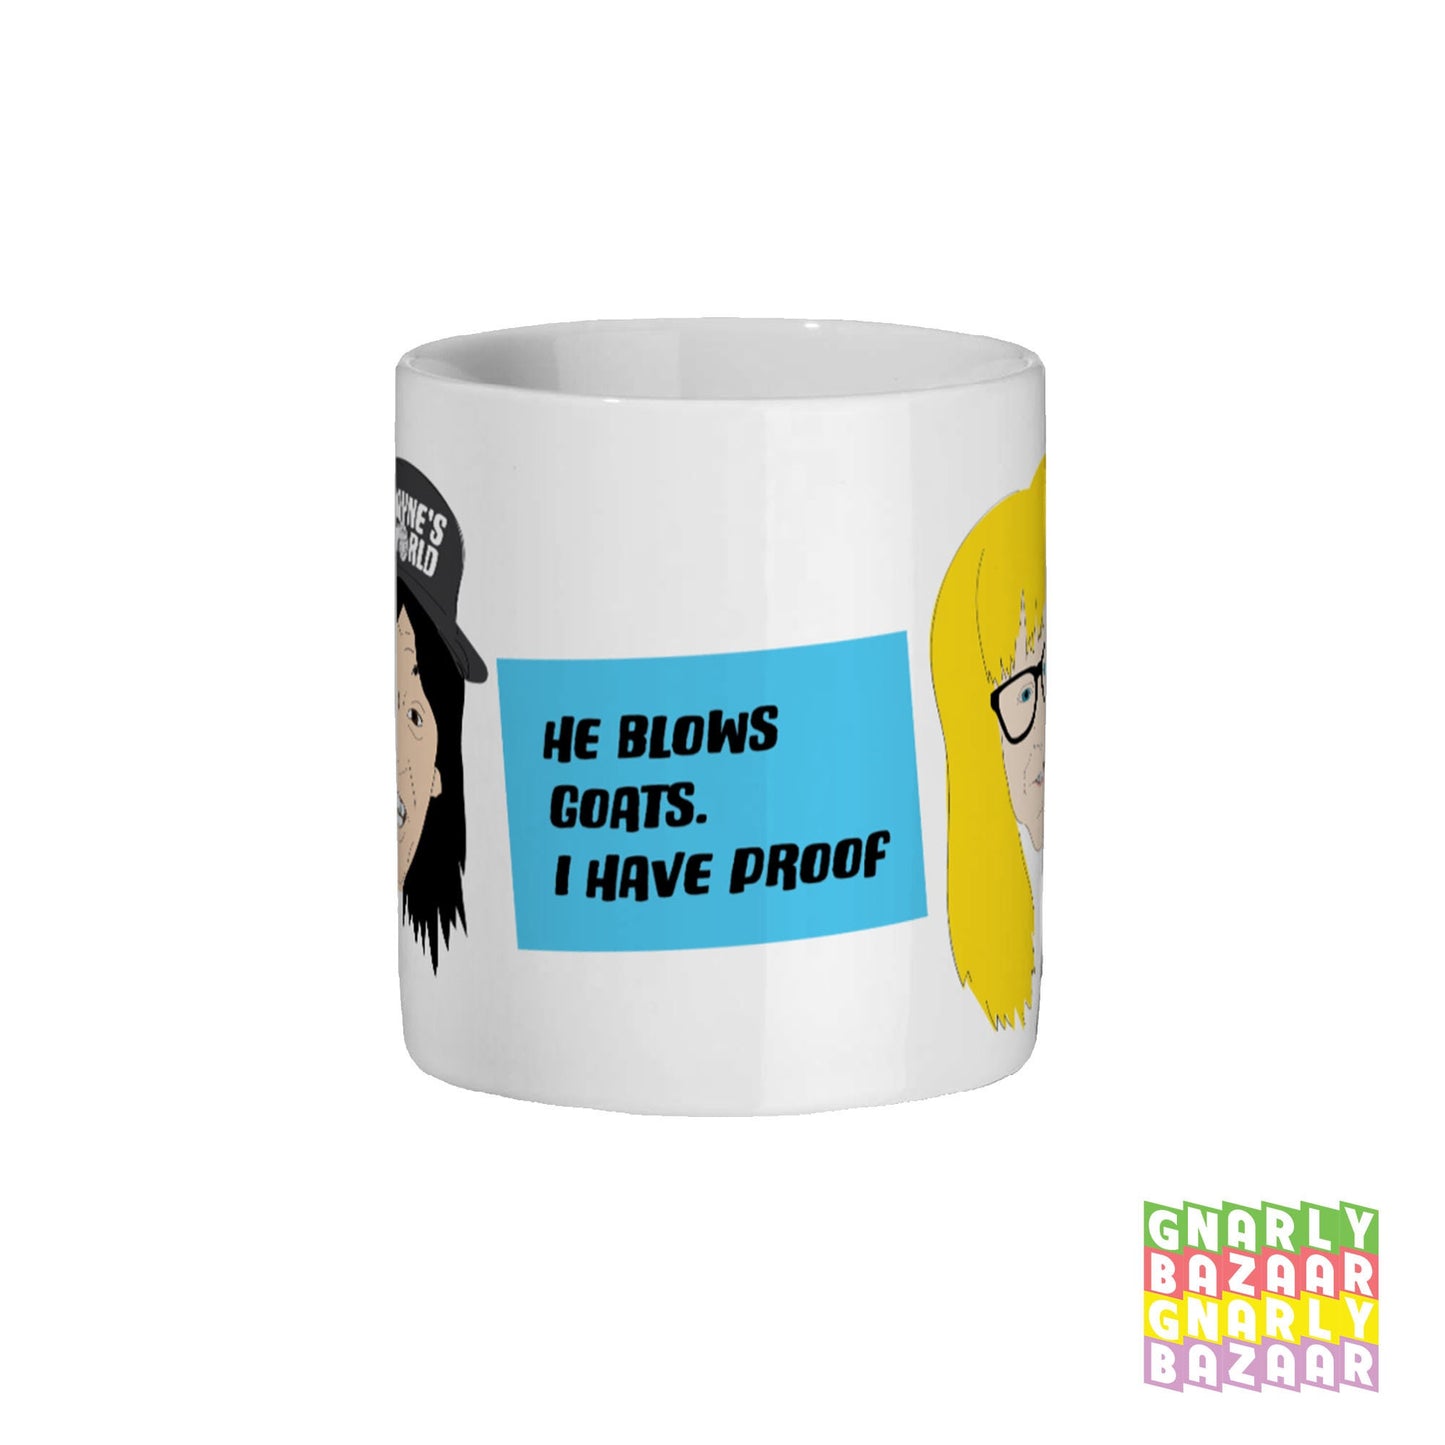 Waynes World He Blows Goats! 90s cult movie Quote Mug Funny Gift Coffee Novelty Present